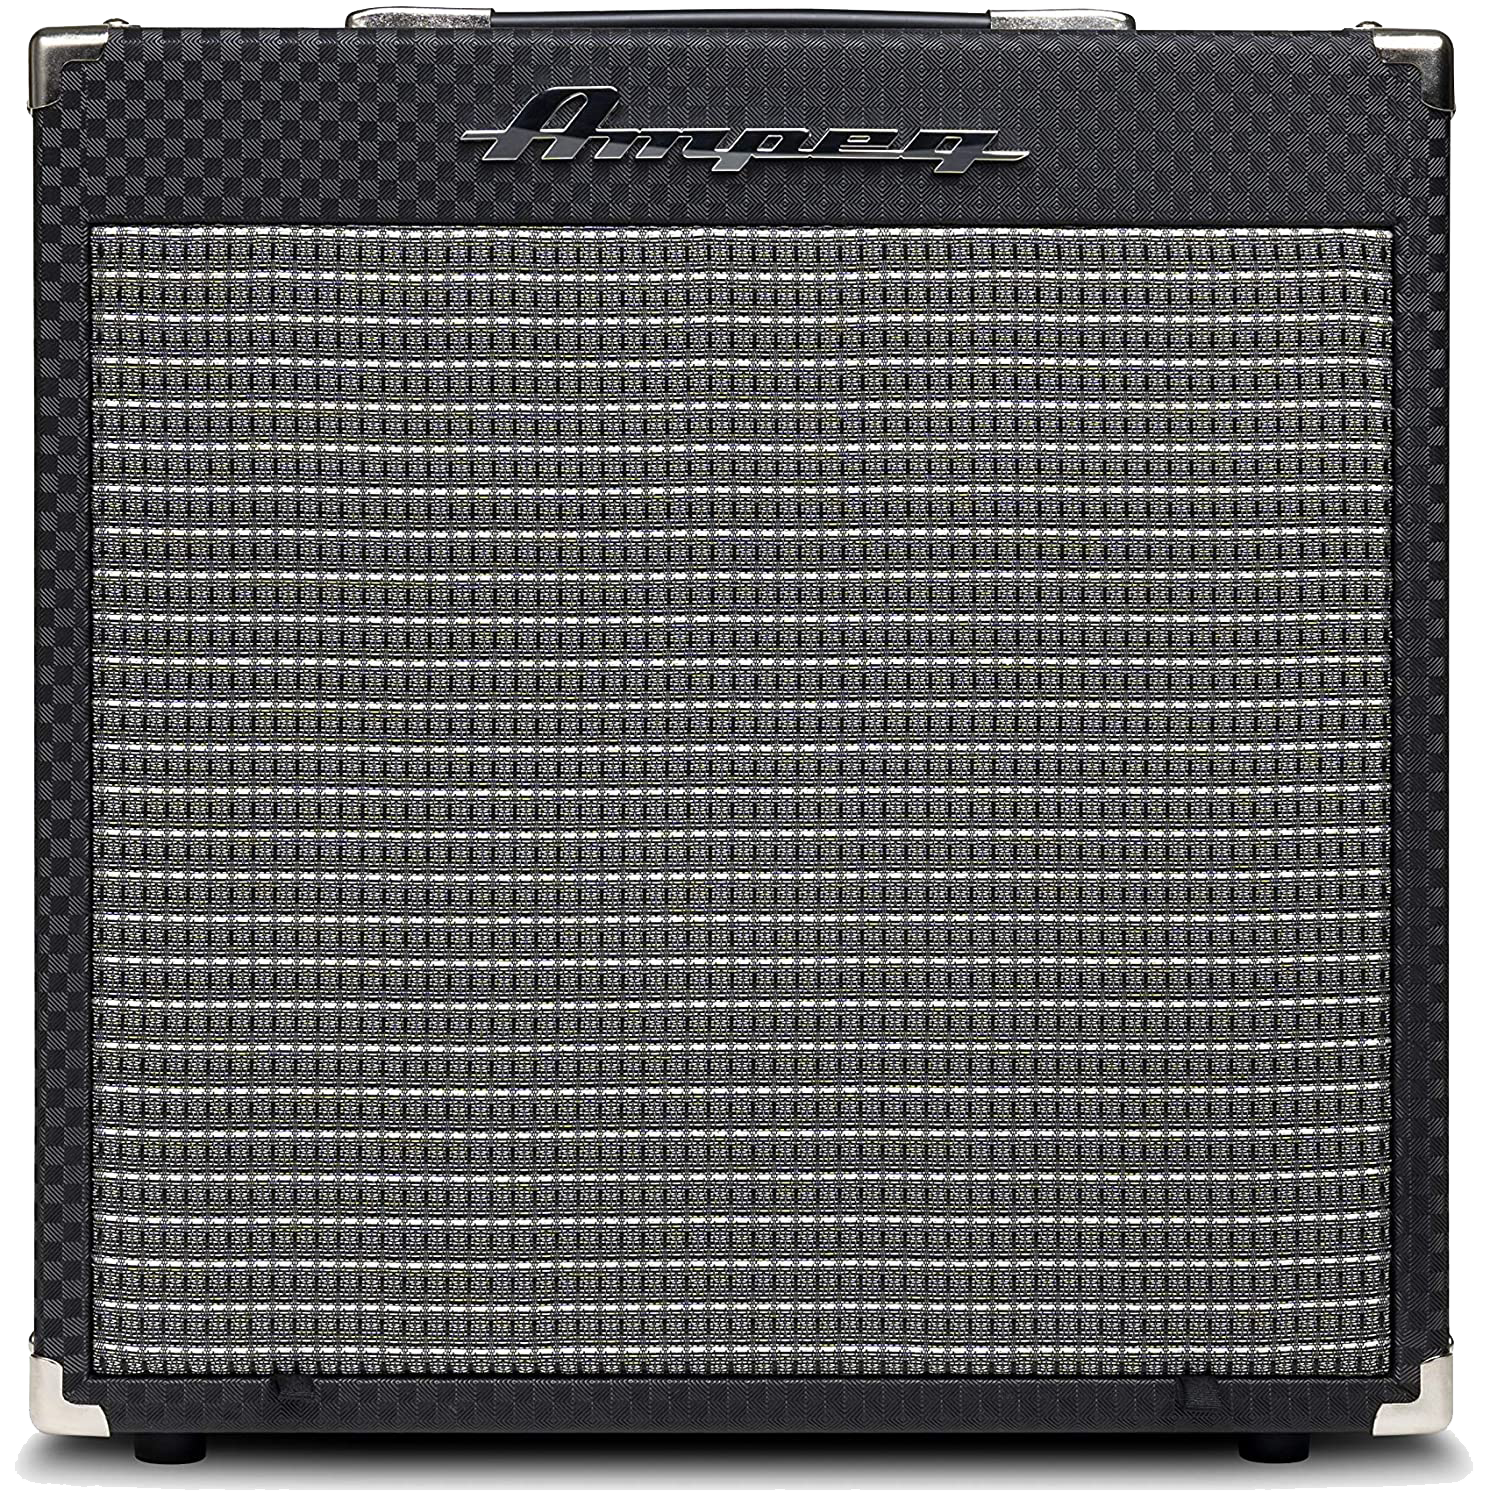 ampeg rb-108 bass combo amp front view